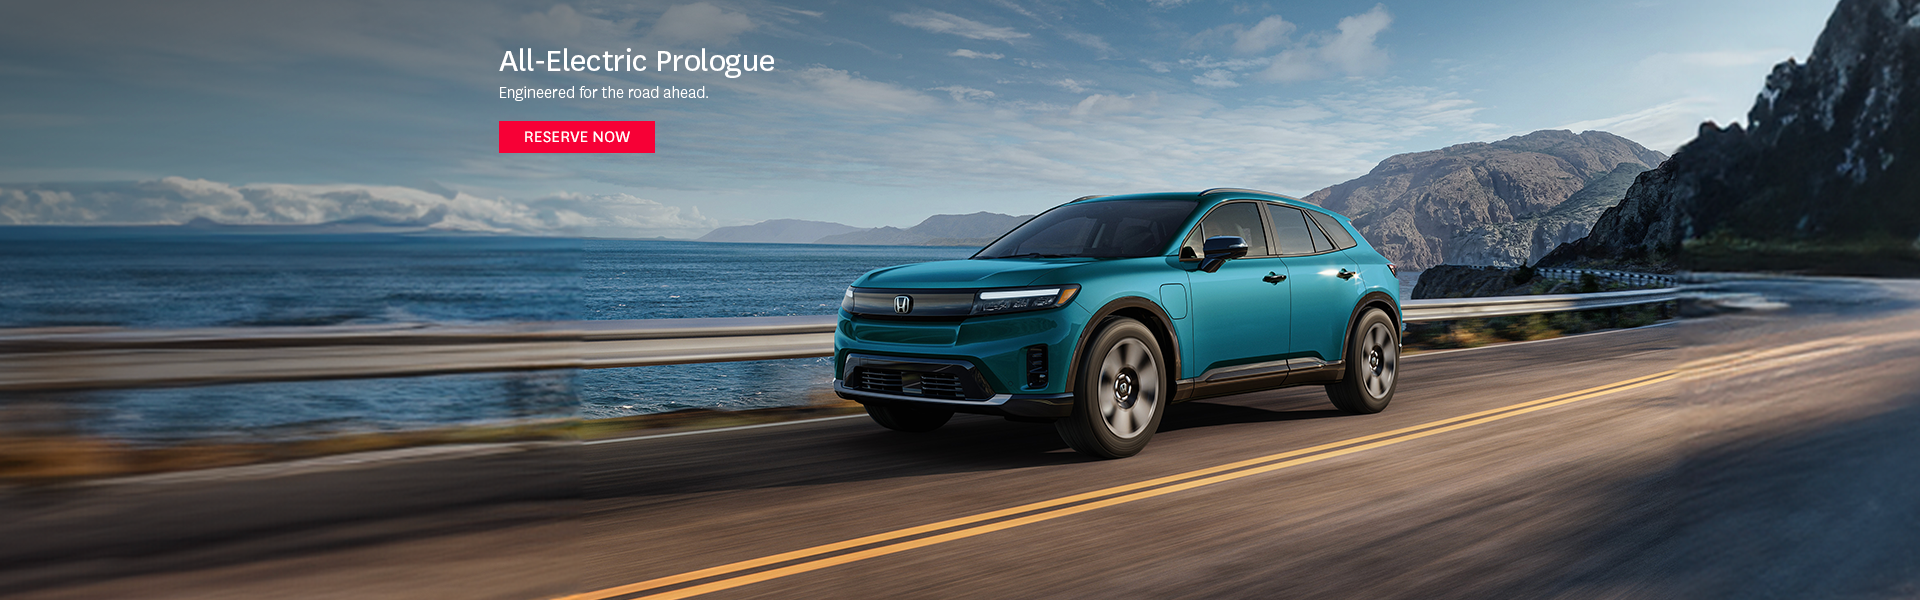 All-Electric Prologue